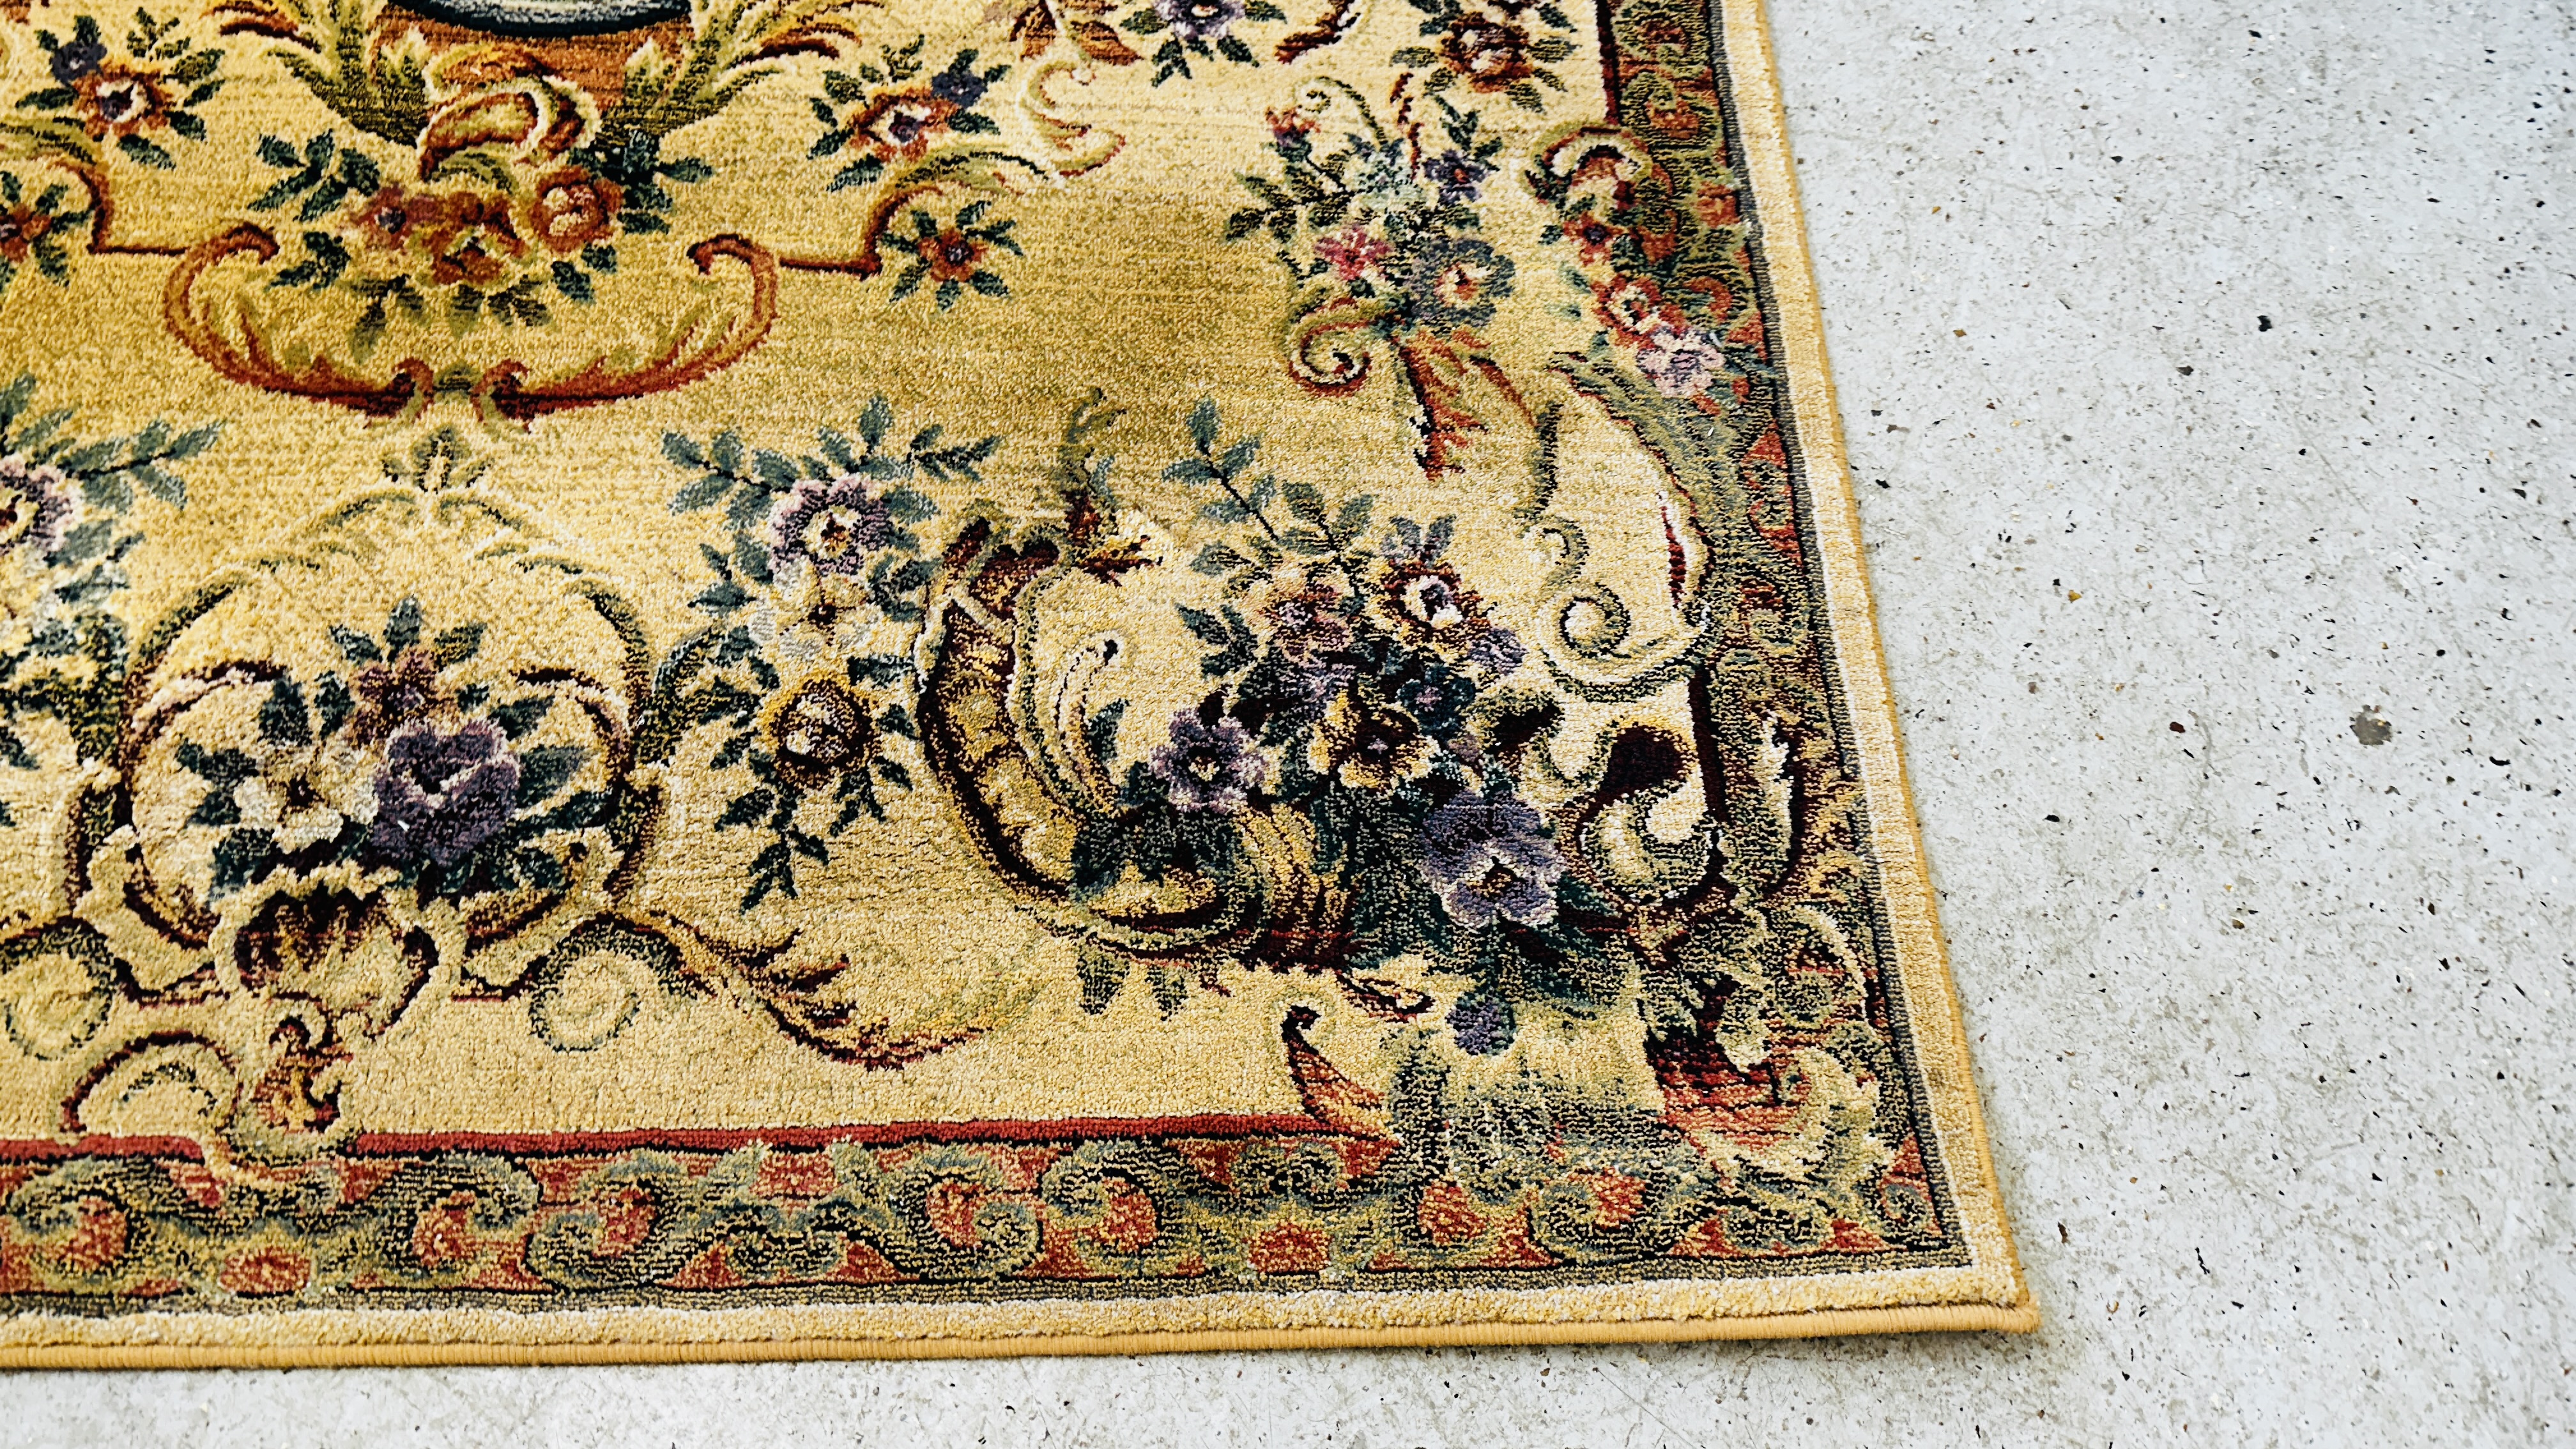 A FAWN PATTERNED GABBEH RUG, 160 X 235CM. - Image 2 of 7